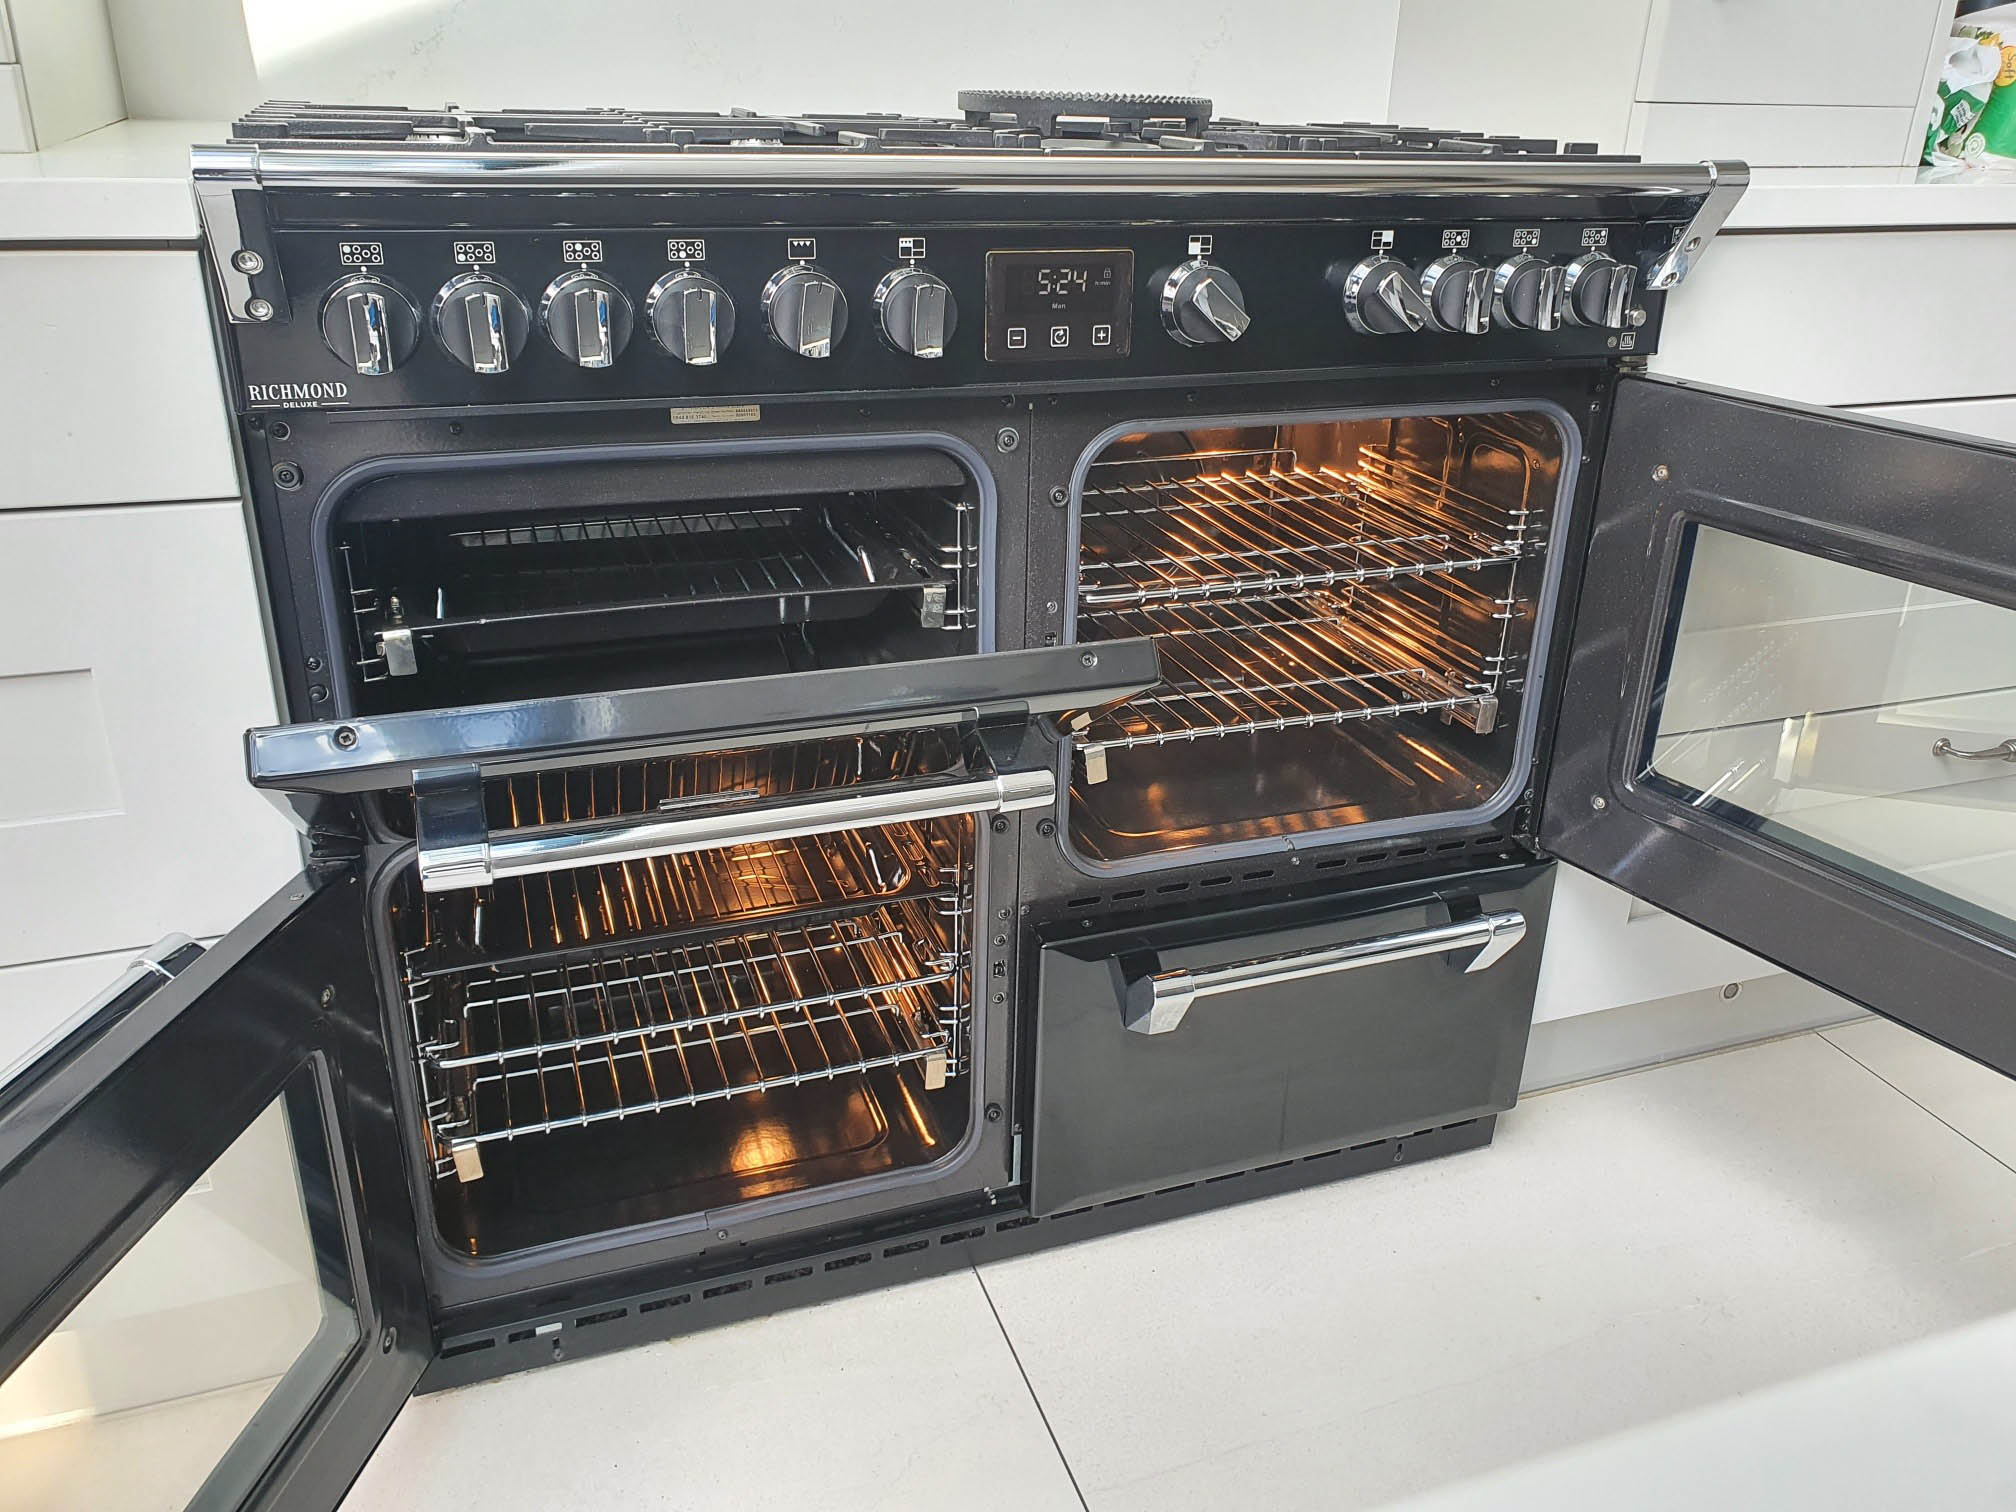 Oven Cleaning Northern Ireland | Clean Oven Belfast | Oven Cleaning NI | Oven Clean ni | Kitchen Cleaning NI | Oven Cleaning Belfast | Kitchen Appliance Cleaning Belfast | Oven Clean NI